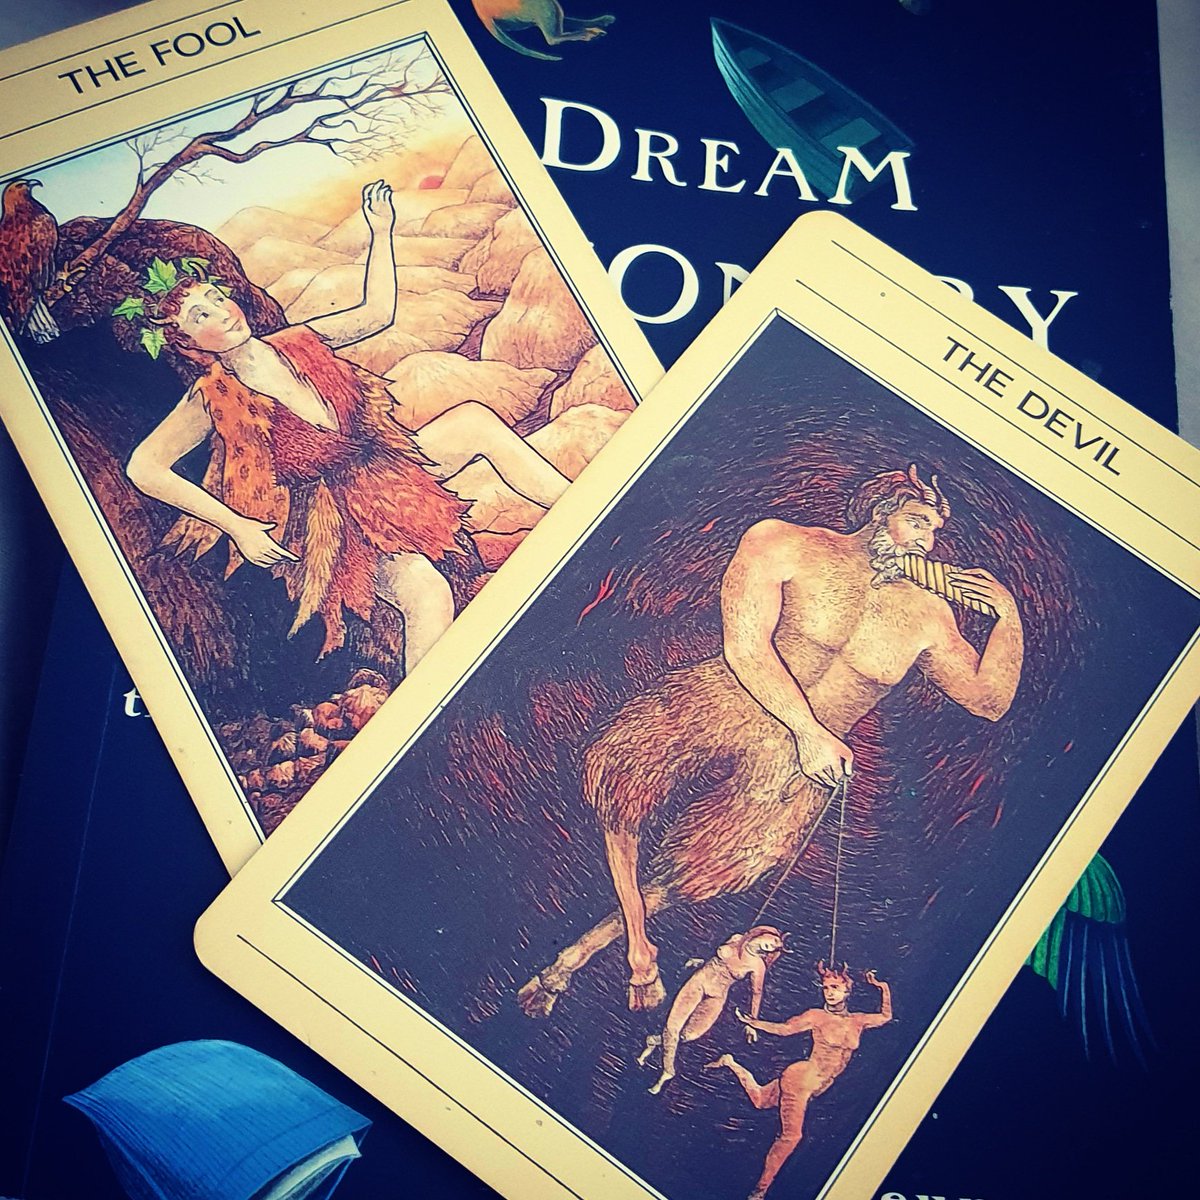 From The Fool to The Devil... and (ideally) back again! The energy... the power struggle... it's time to, not just meet, but own your shadow 🌛🌕🌜💋 #thefool #TheDevil #concious #unconscious #balance #plutoretrograde #plutoincapricorn #pluto #retrograde #thefoolsjourney